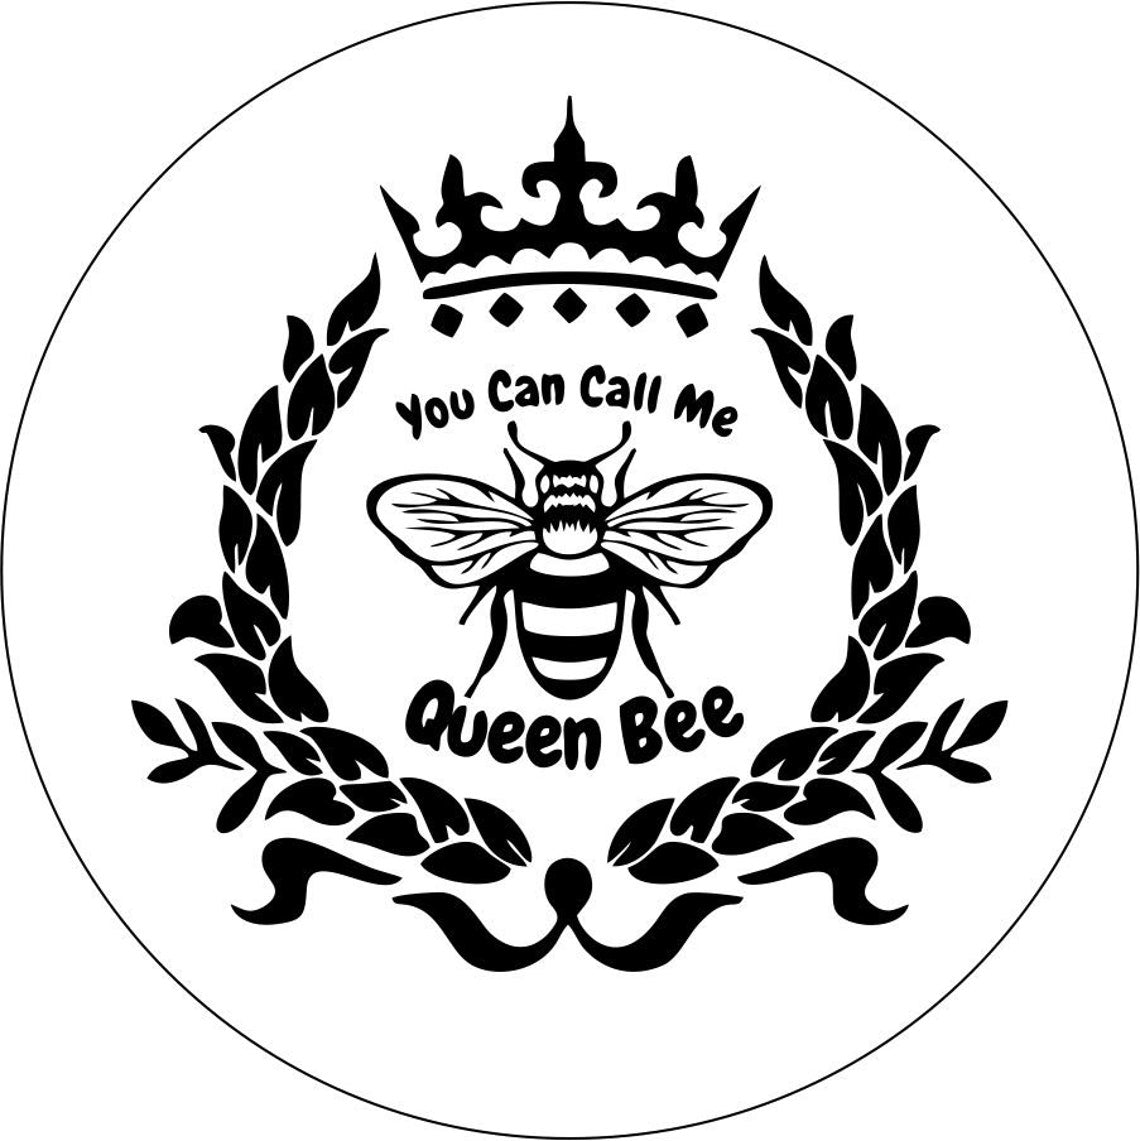 You can call me queen bee insignia design spare tire cover for Jeep, RV, Bronco, Camper, Trailer, and more on white vinyl